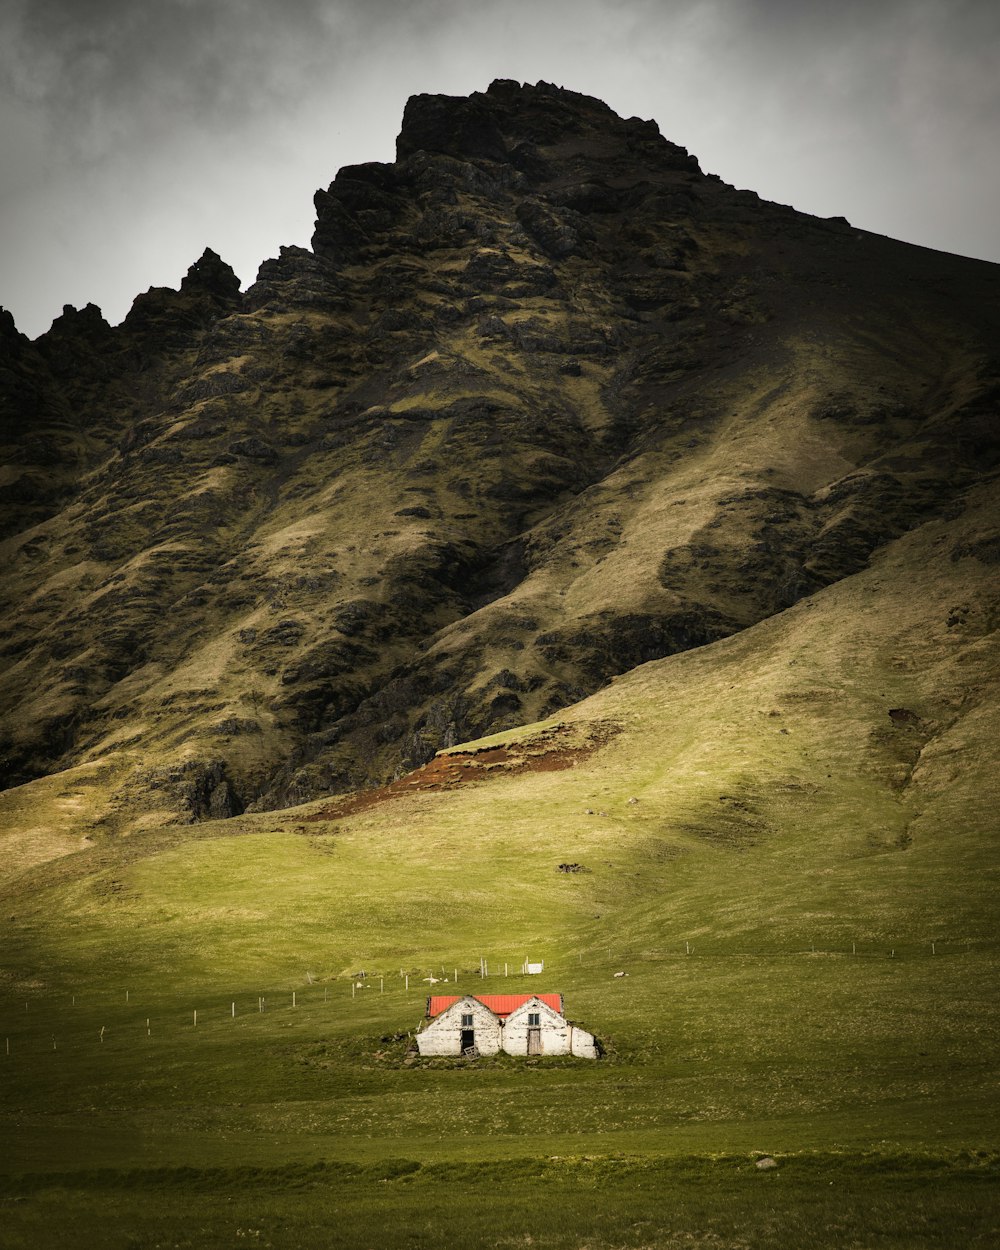 white and red house on green grass field near mountain